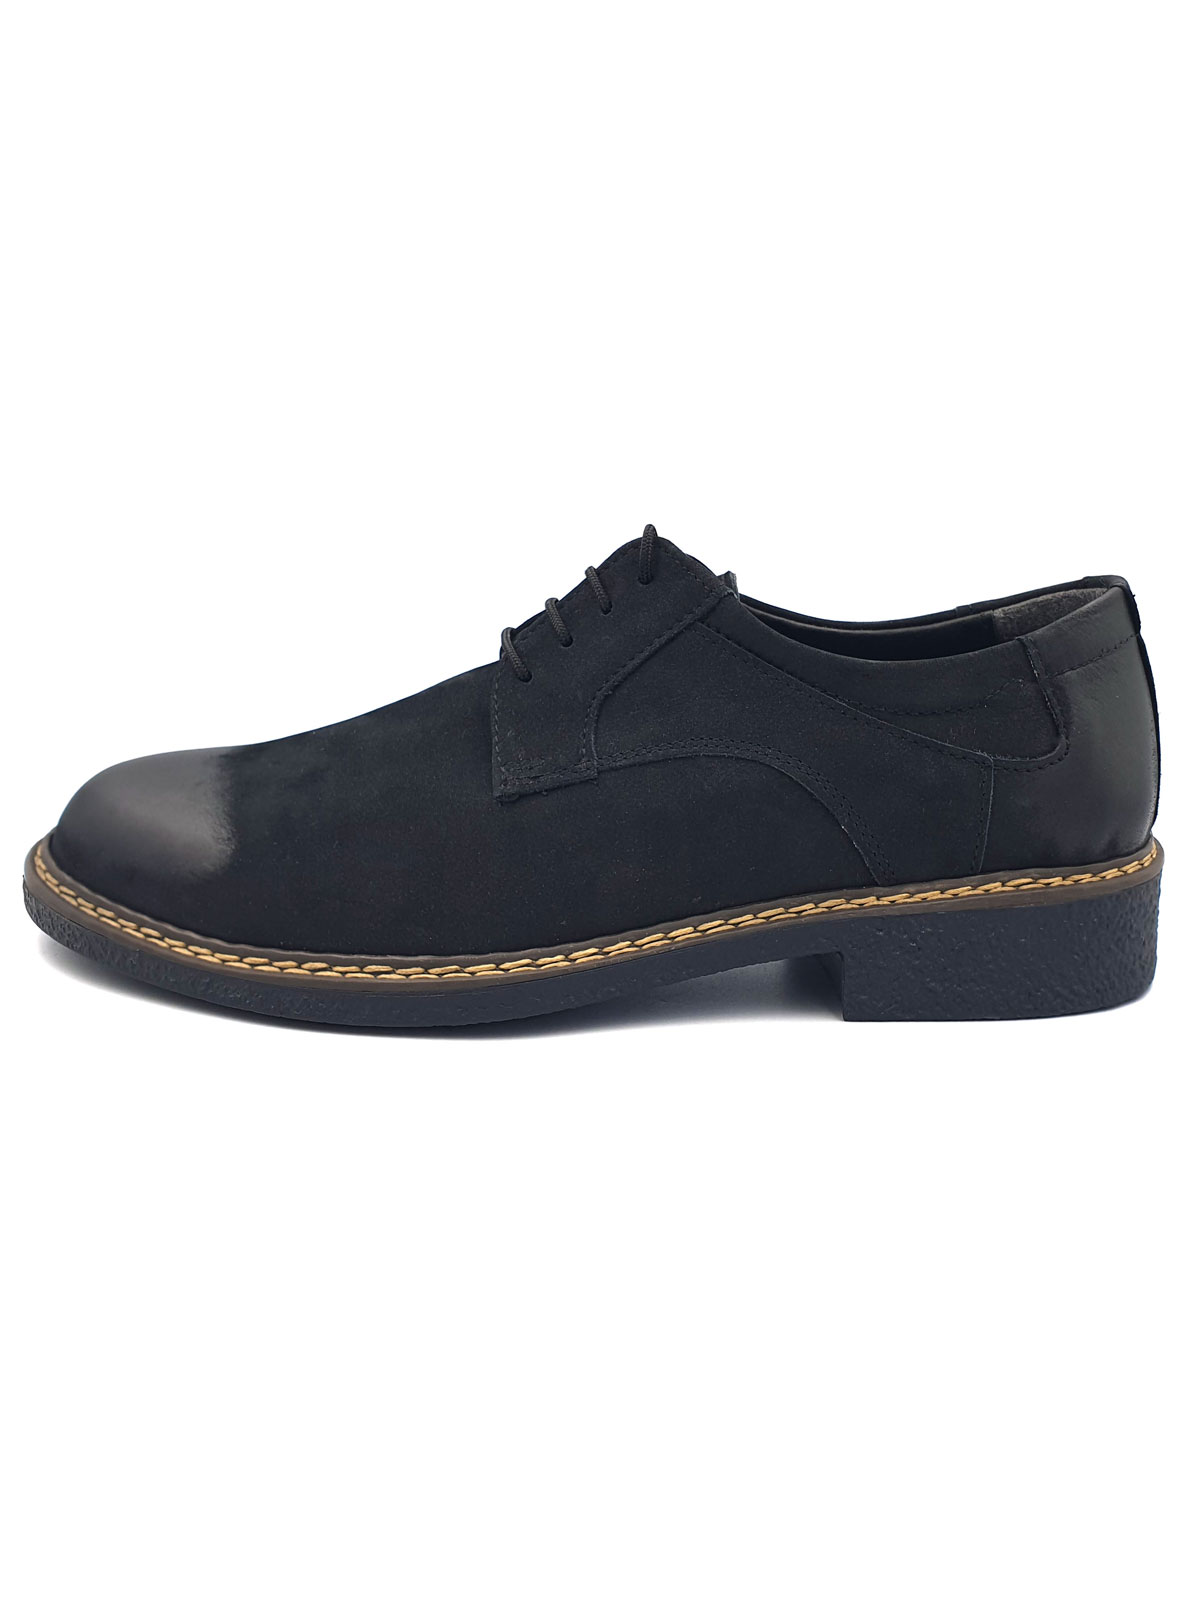 Mens shoes made of natural leather - 81104 - € 80.99 img2